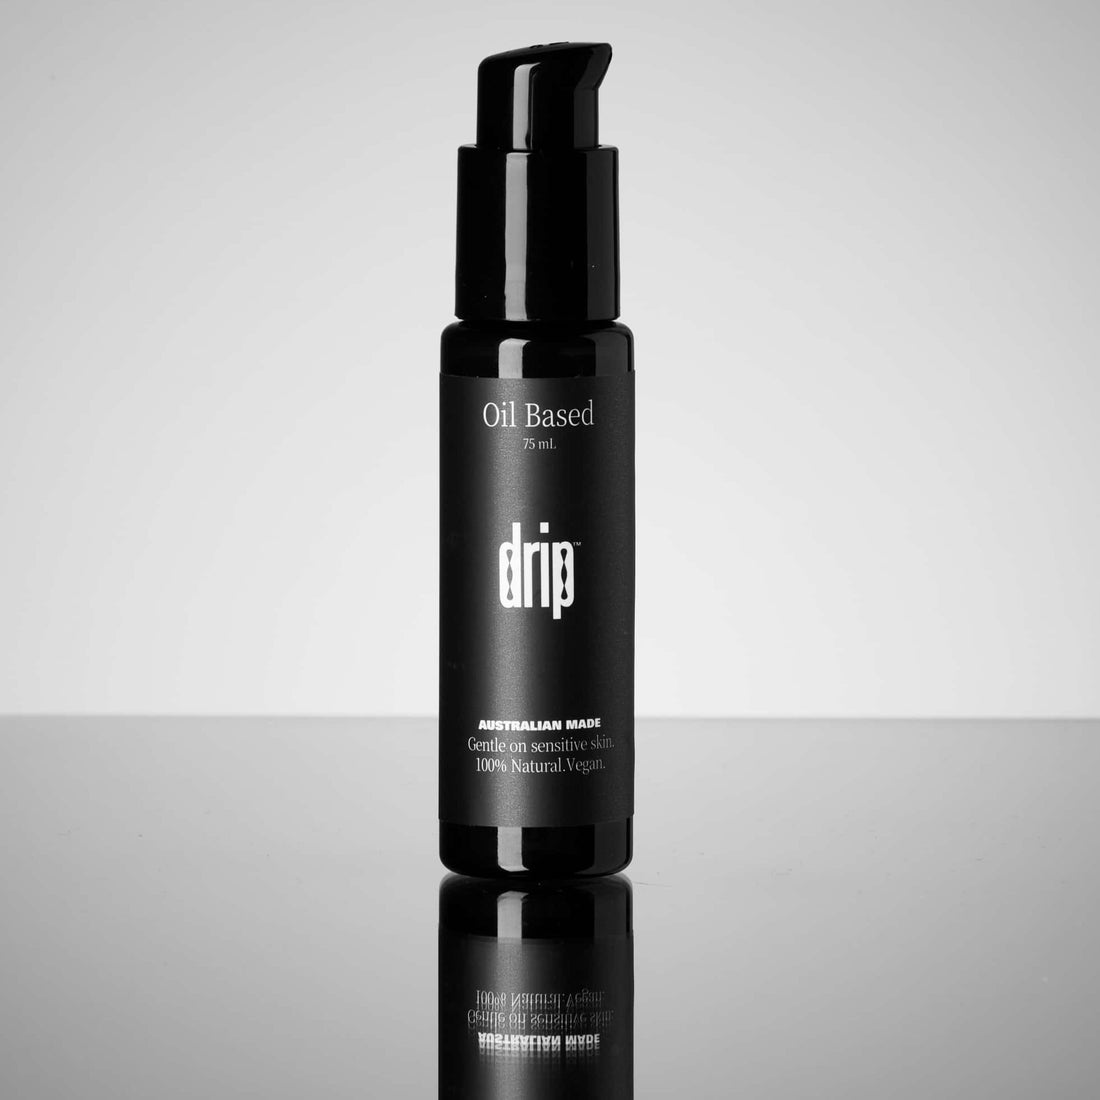 drip lube oil based lubricant product